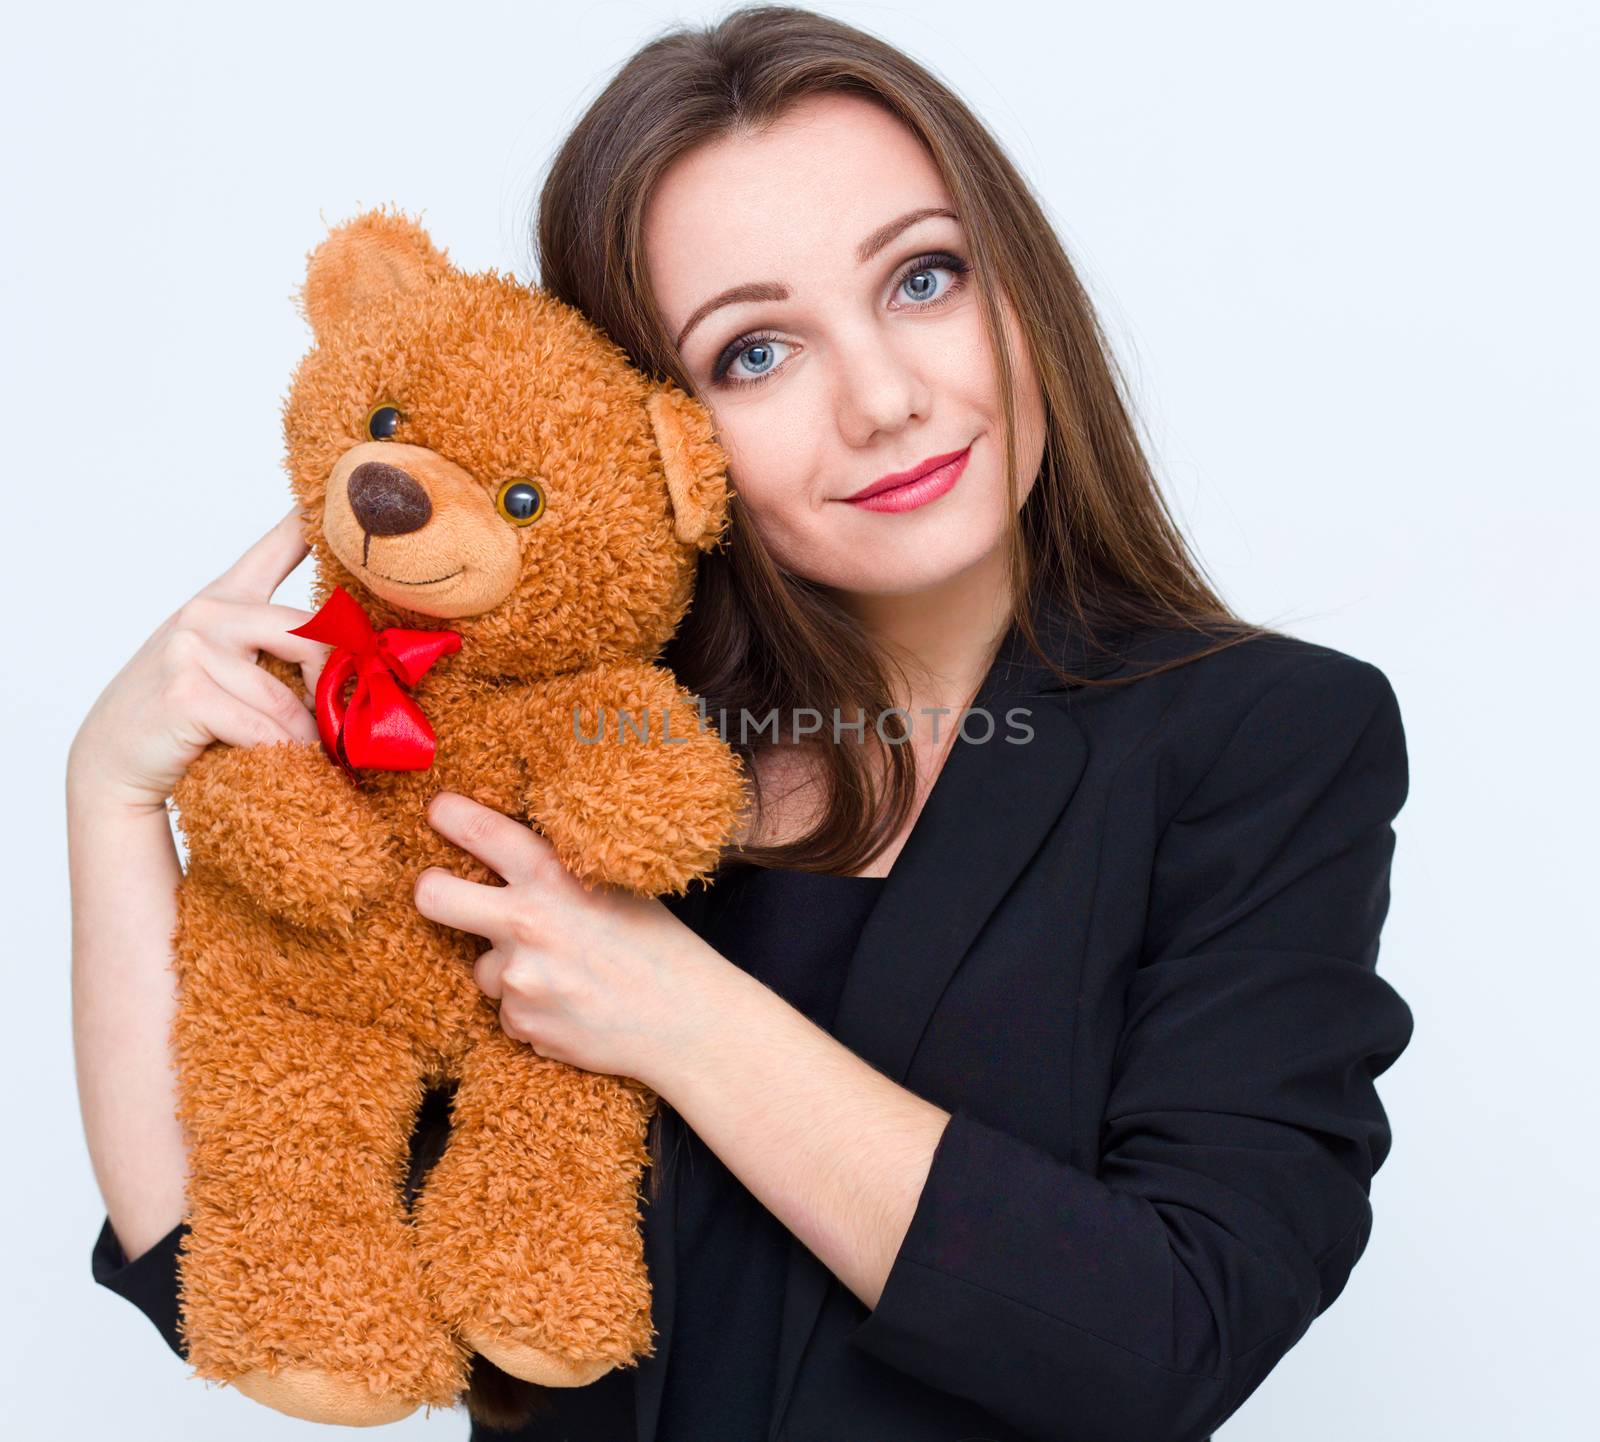 Young smiling beautiful woman holding brown teddy bear
